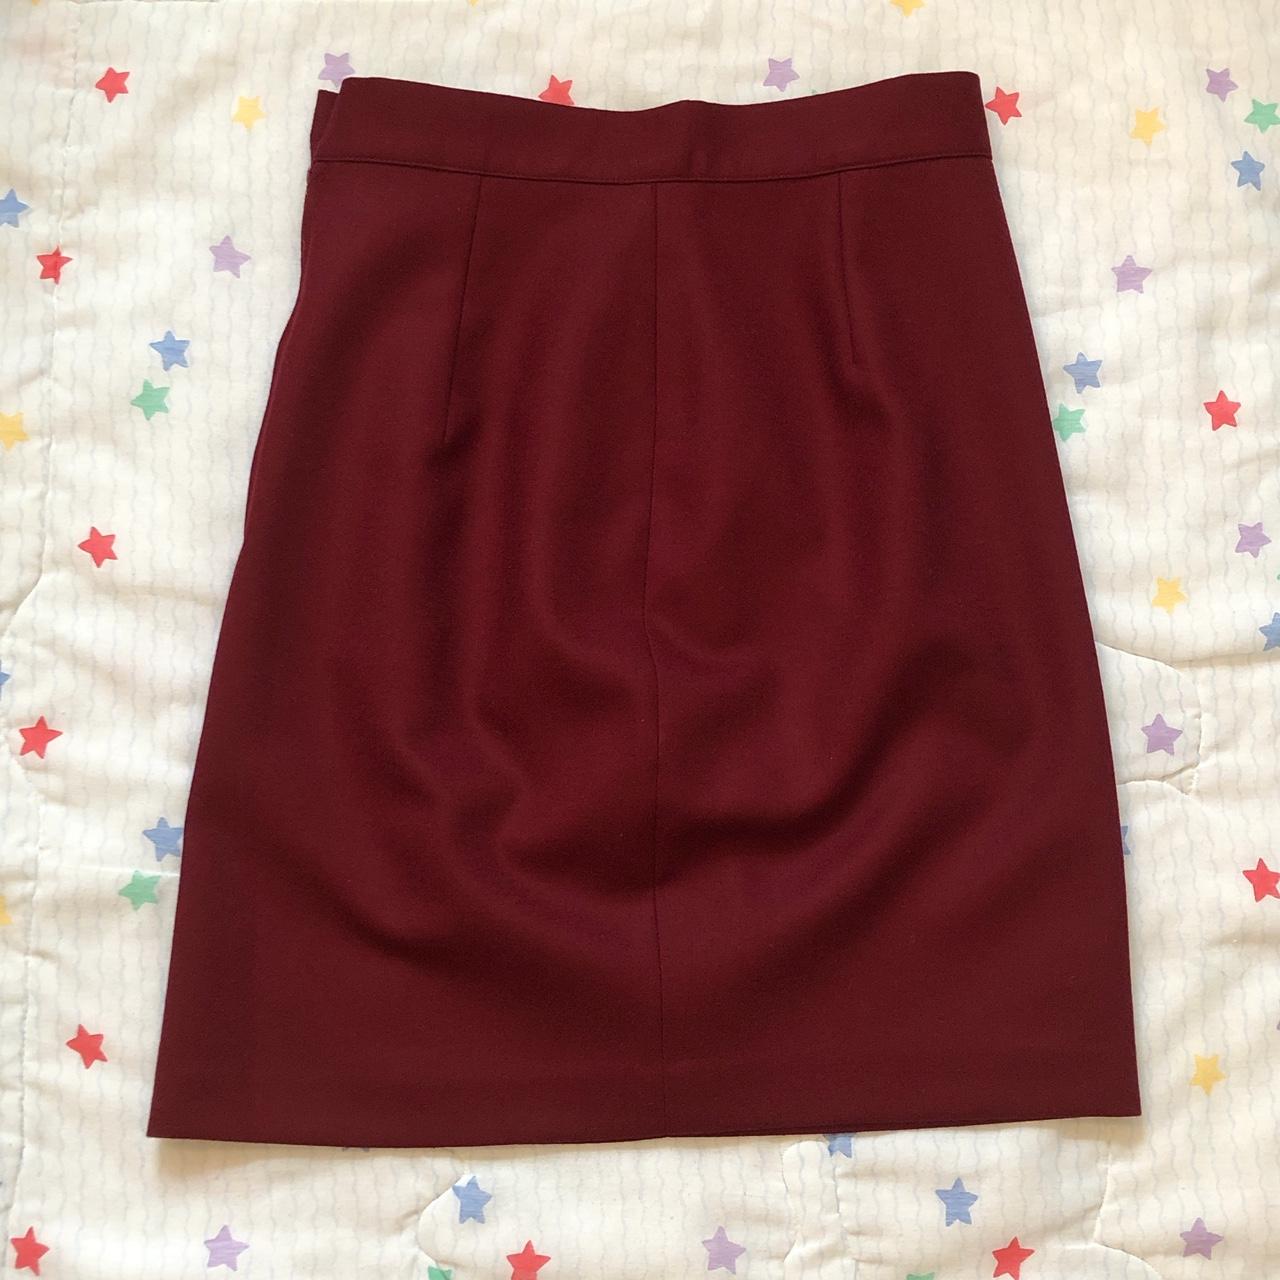 Vintage Lined Wool Pencil Skirt ⭐️ from United... - Depop